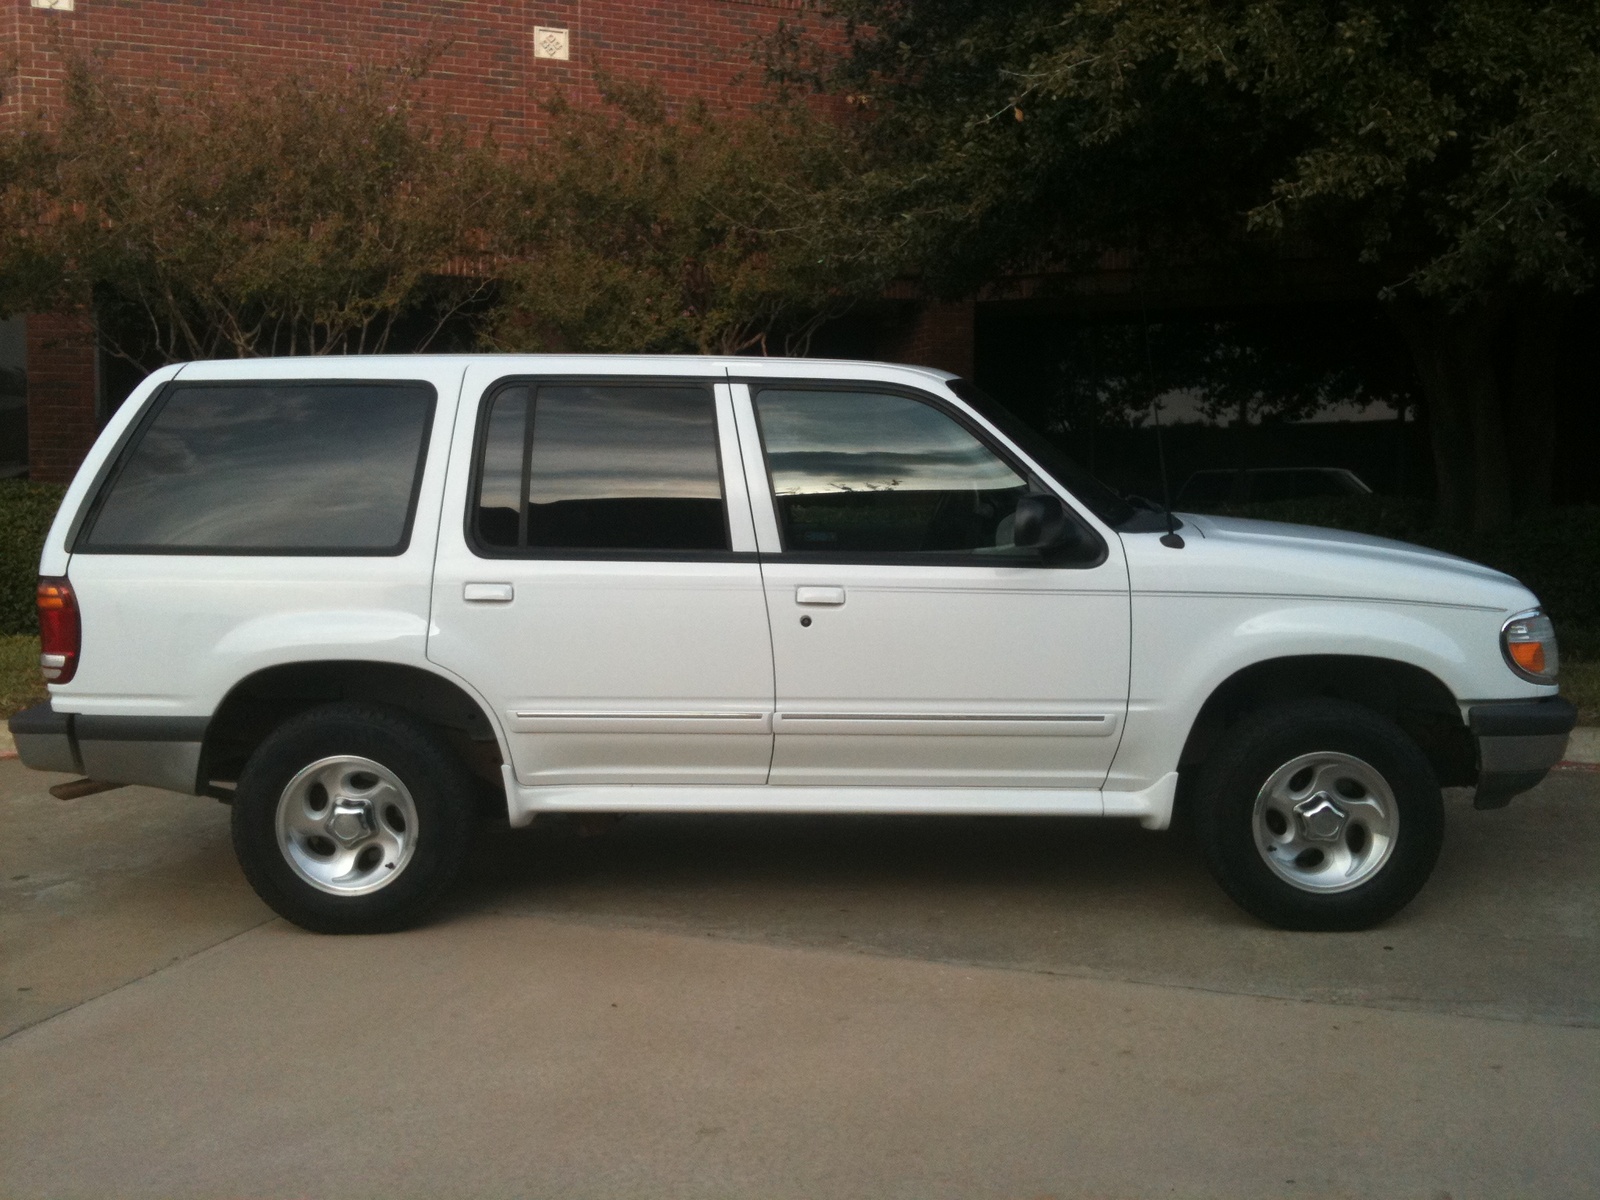 1998 Ford explorer limited review #1